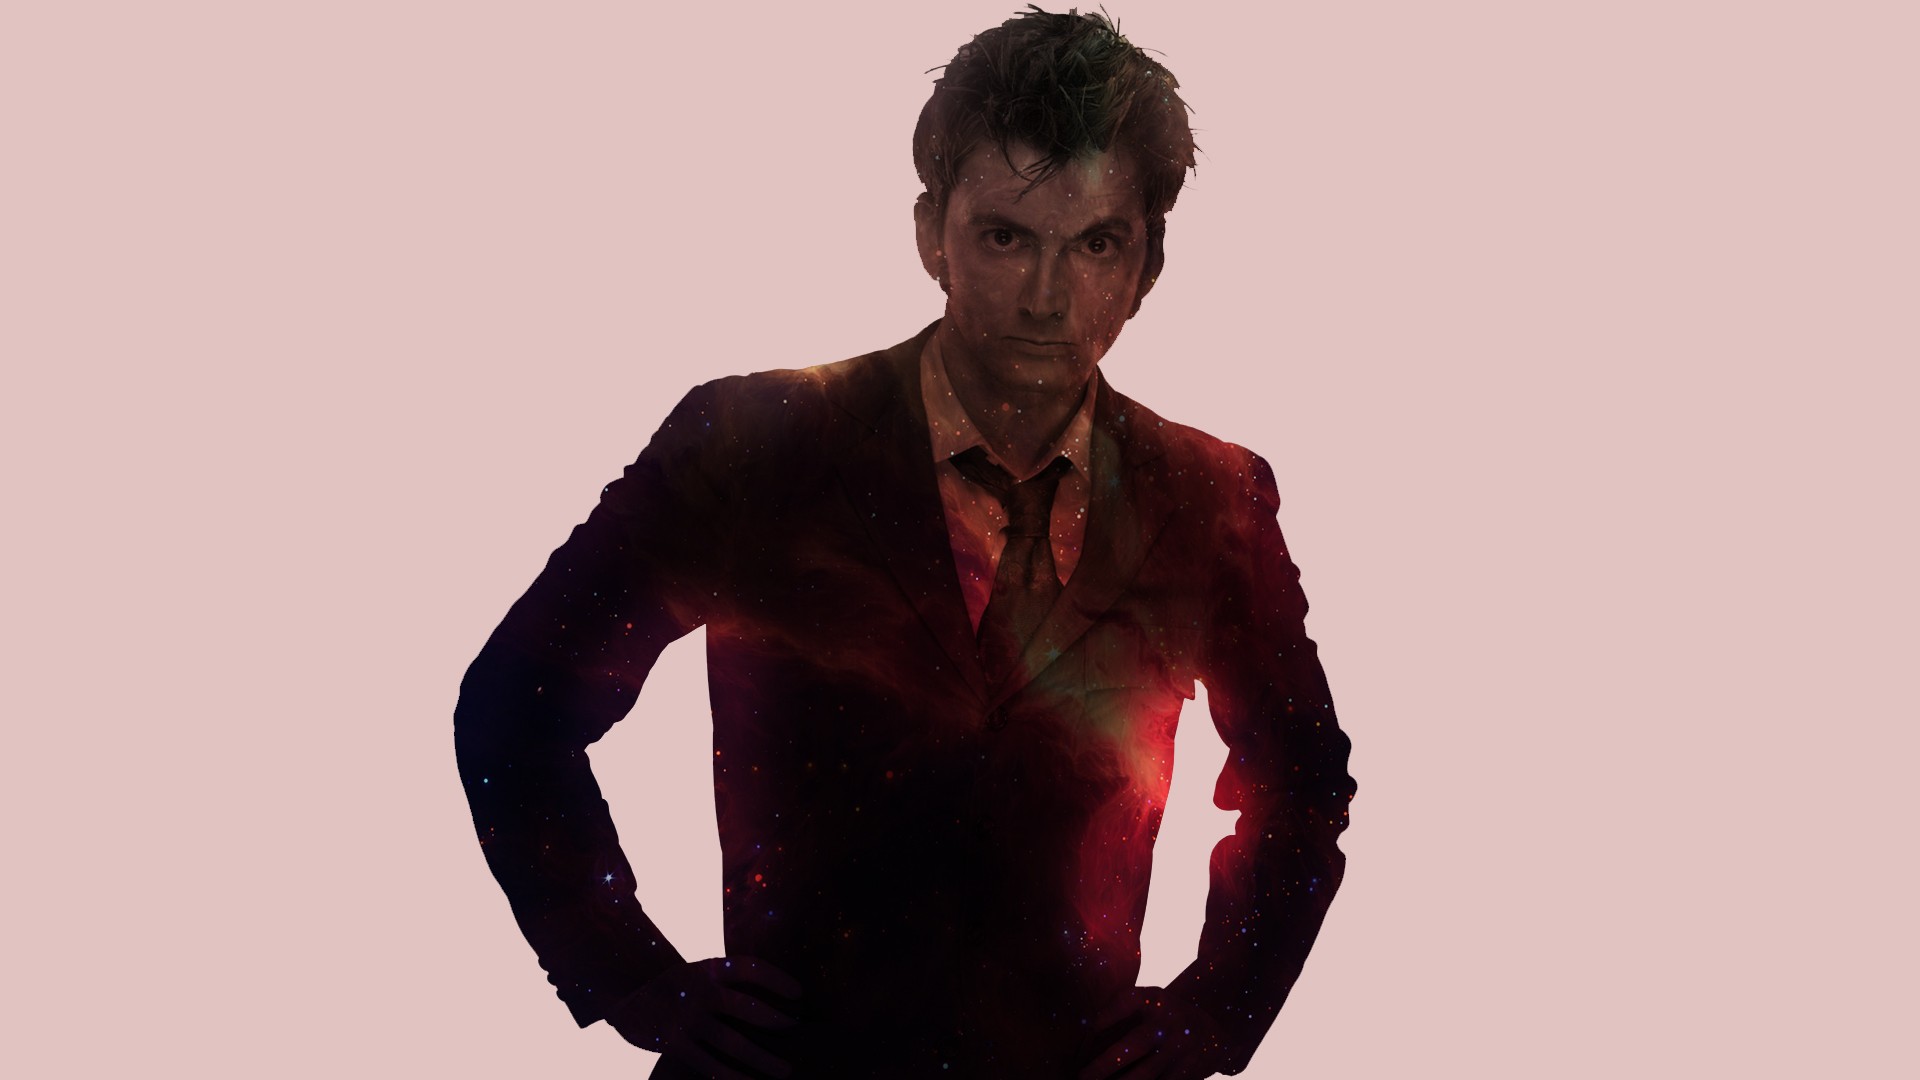 General 1920x1080 Doctor Who The Doctor David Tennant TV series science fiction Science Fiction Men simple background pink background